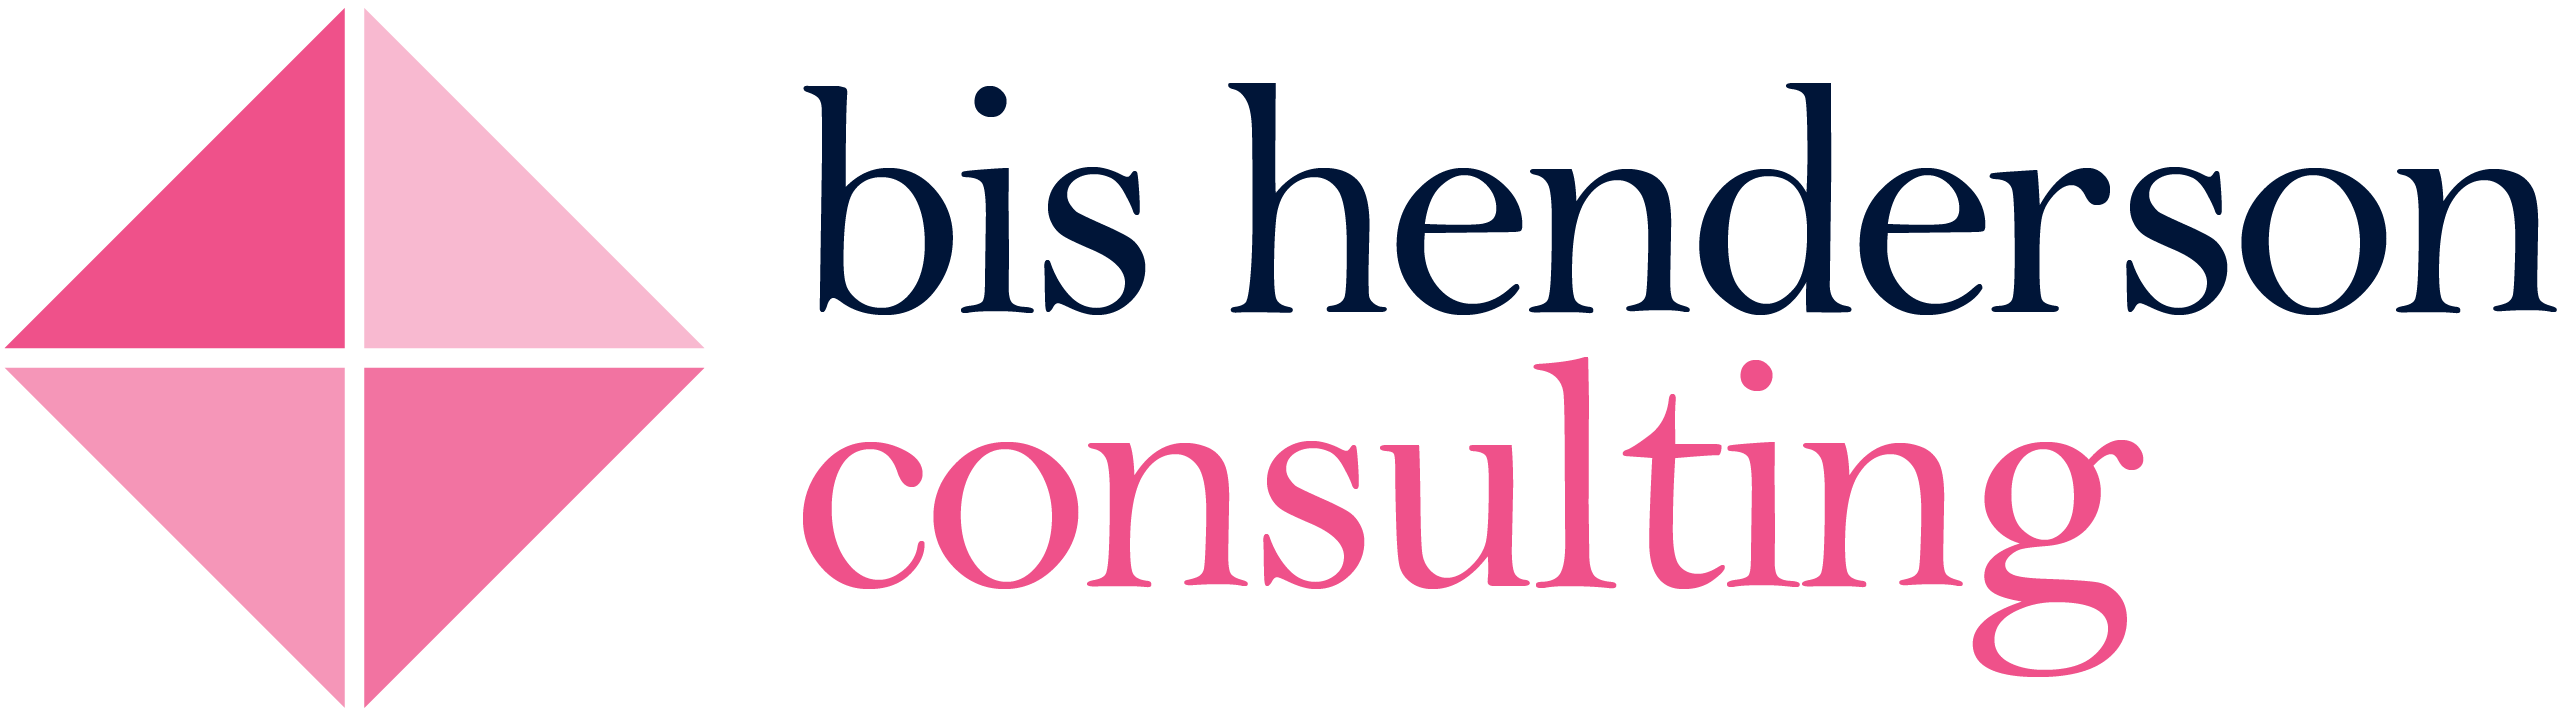 Bis-Henderson Consulting Logo